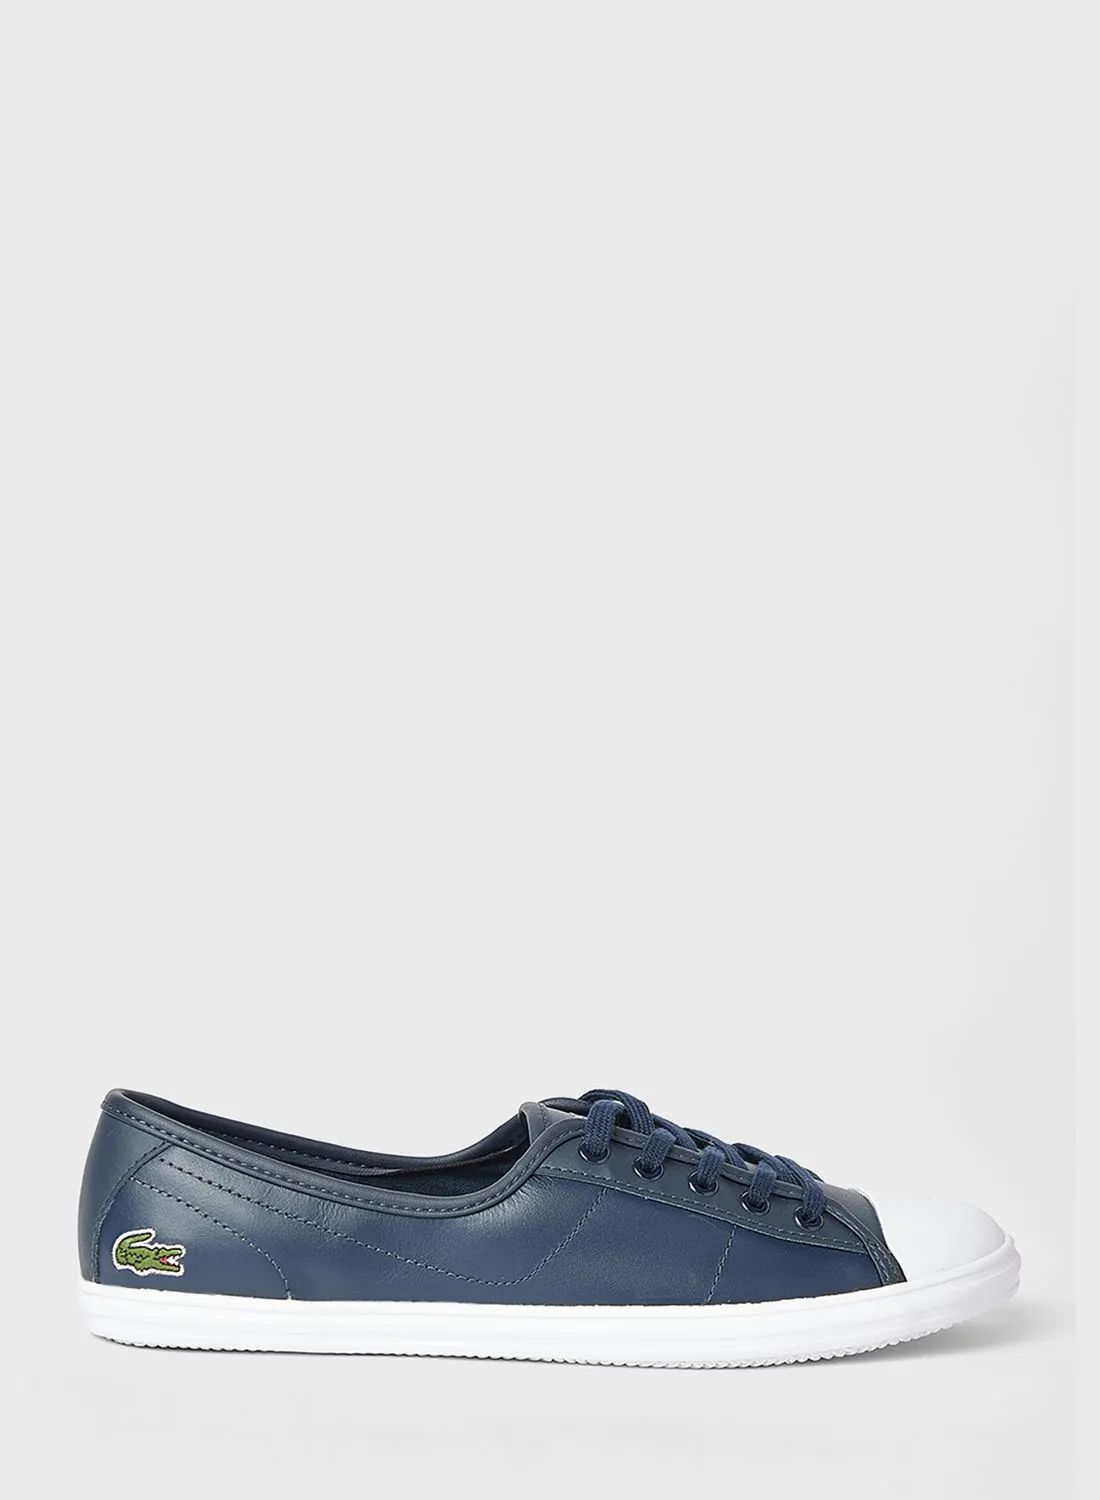 LACOSTE Ziane Leather Sneakers